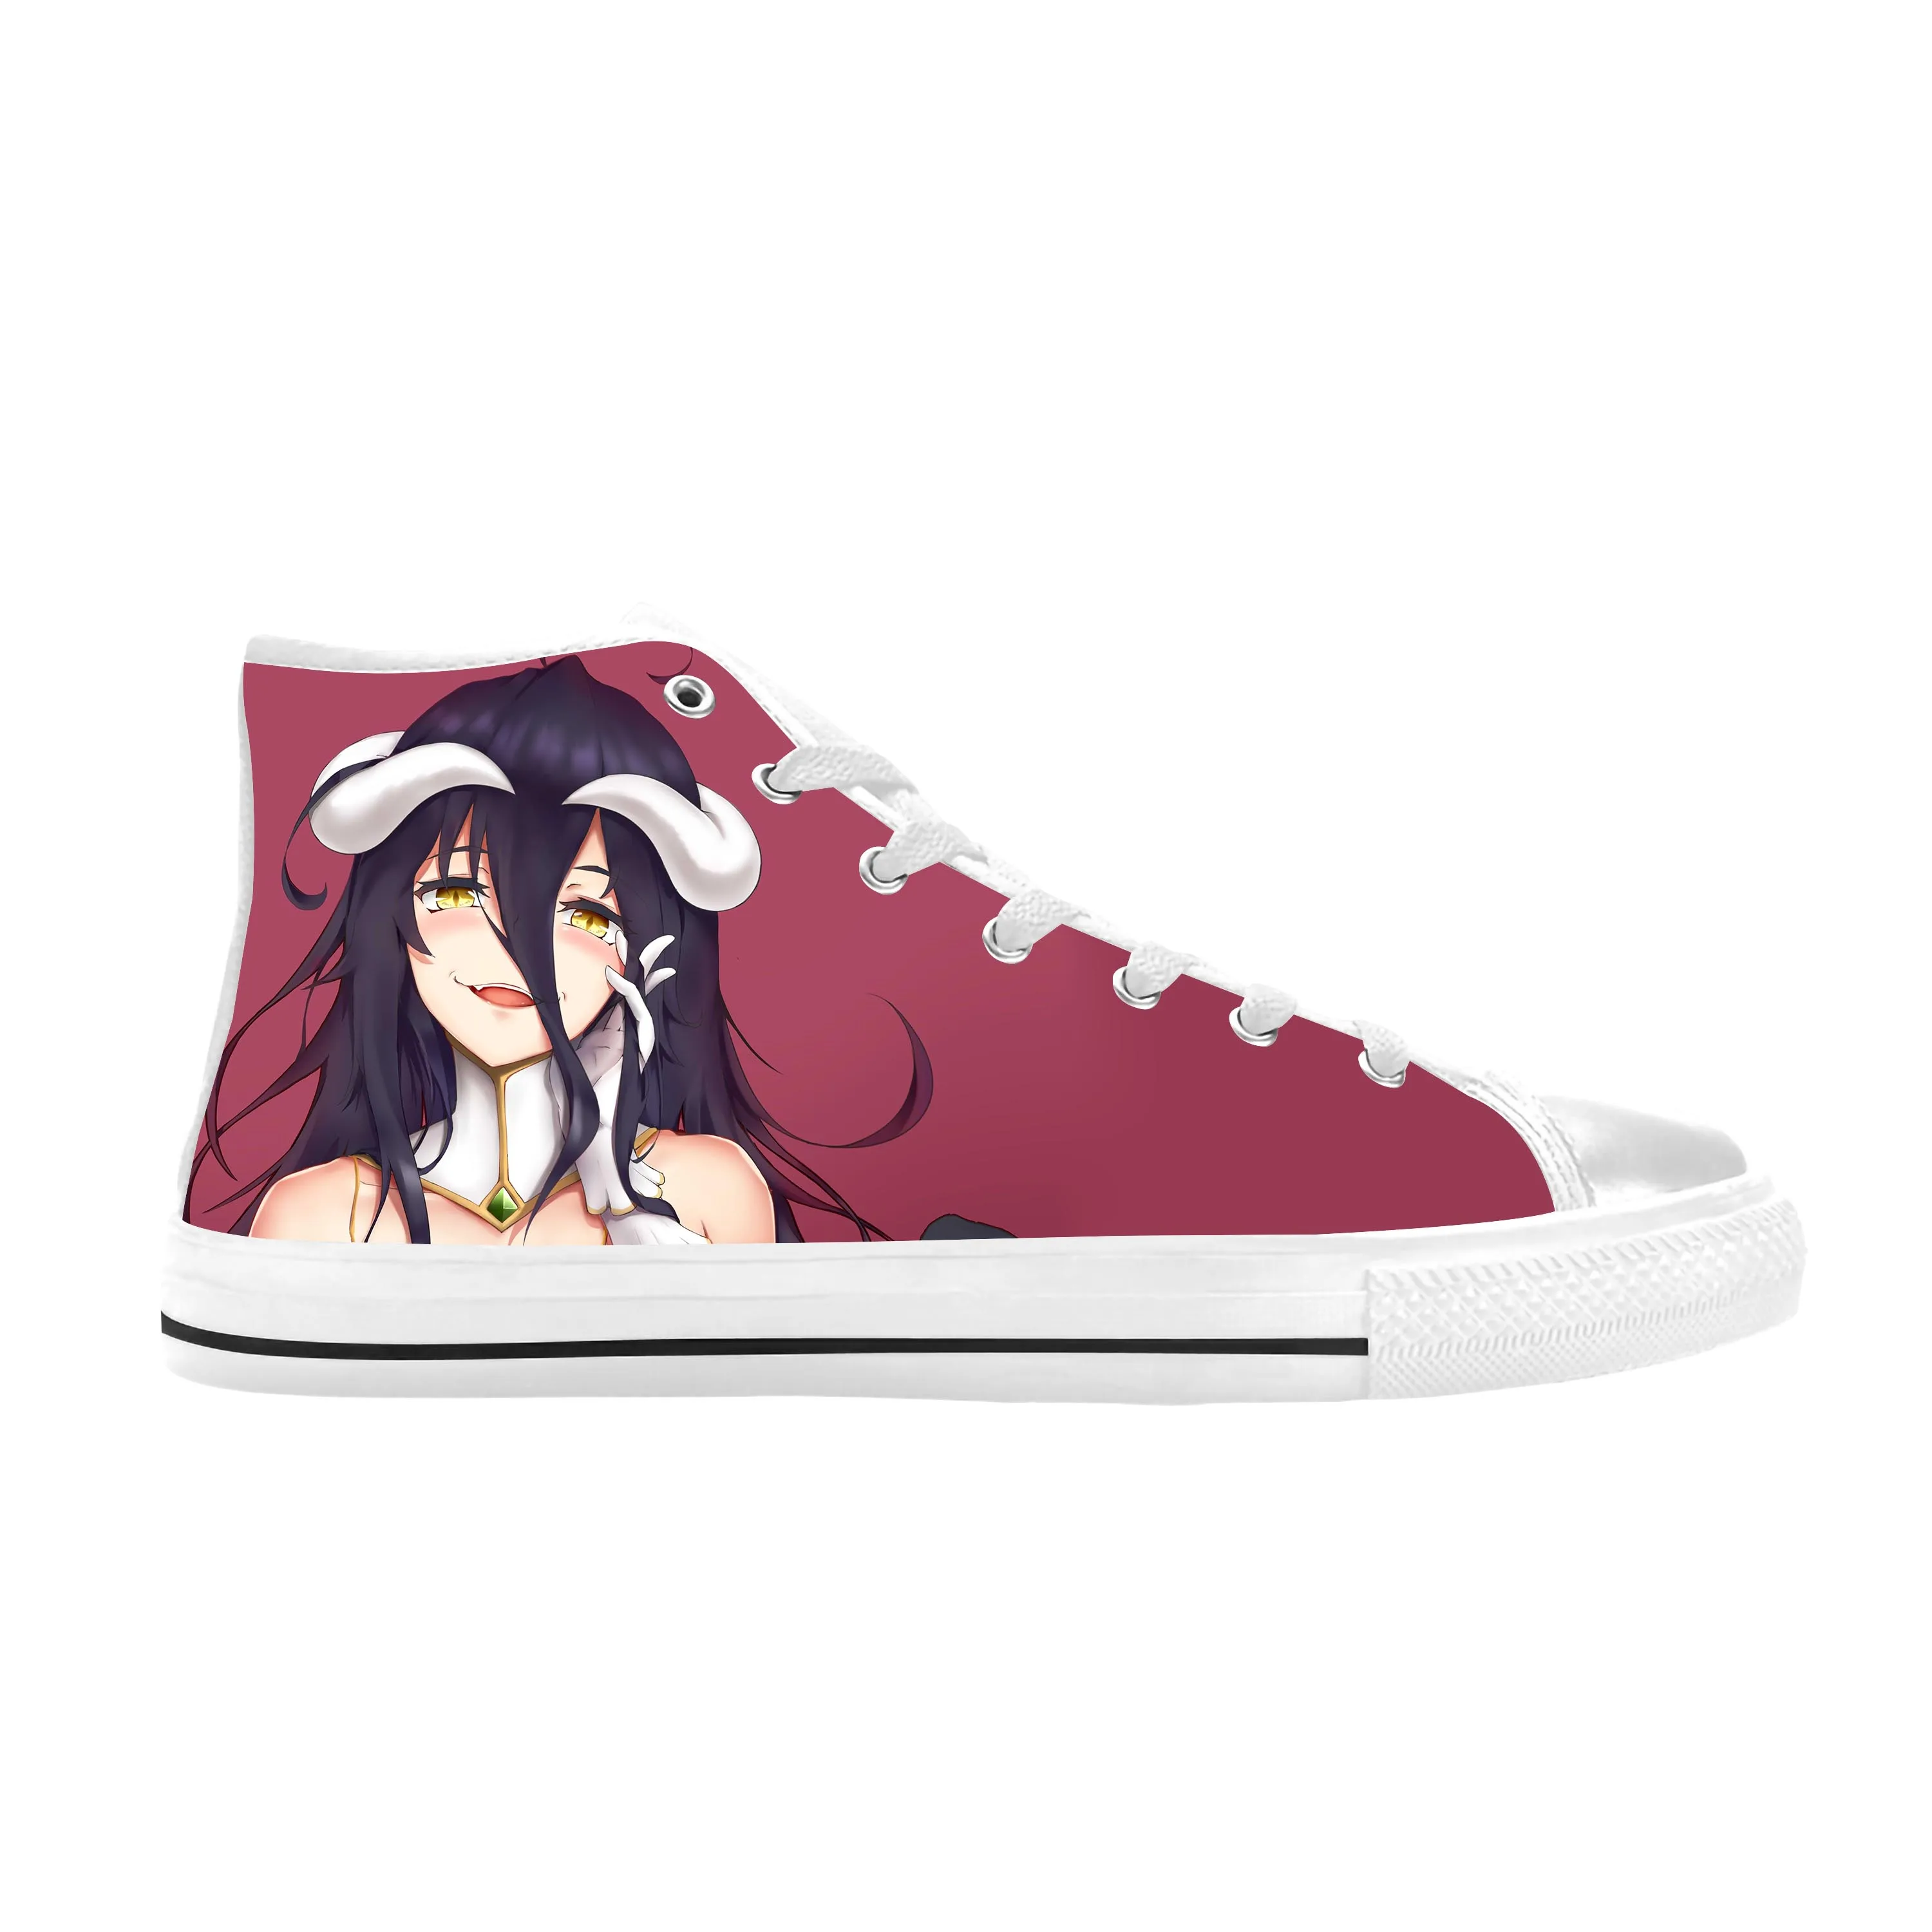 Japanese Anime Manga Cartoon Albedo Overlord Cute Casual Cloth Shoes High Top Comfortable Breathable 3D Print Men Women Sneakers